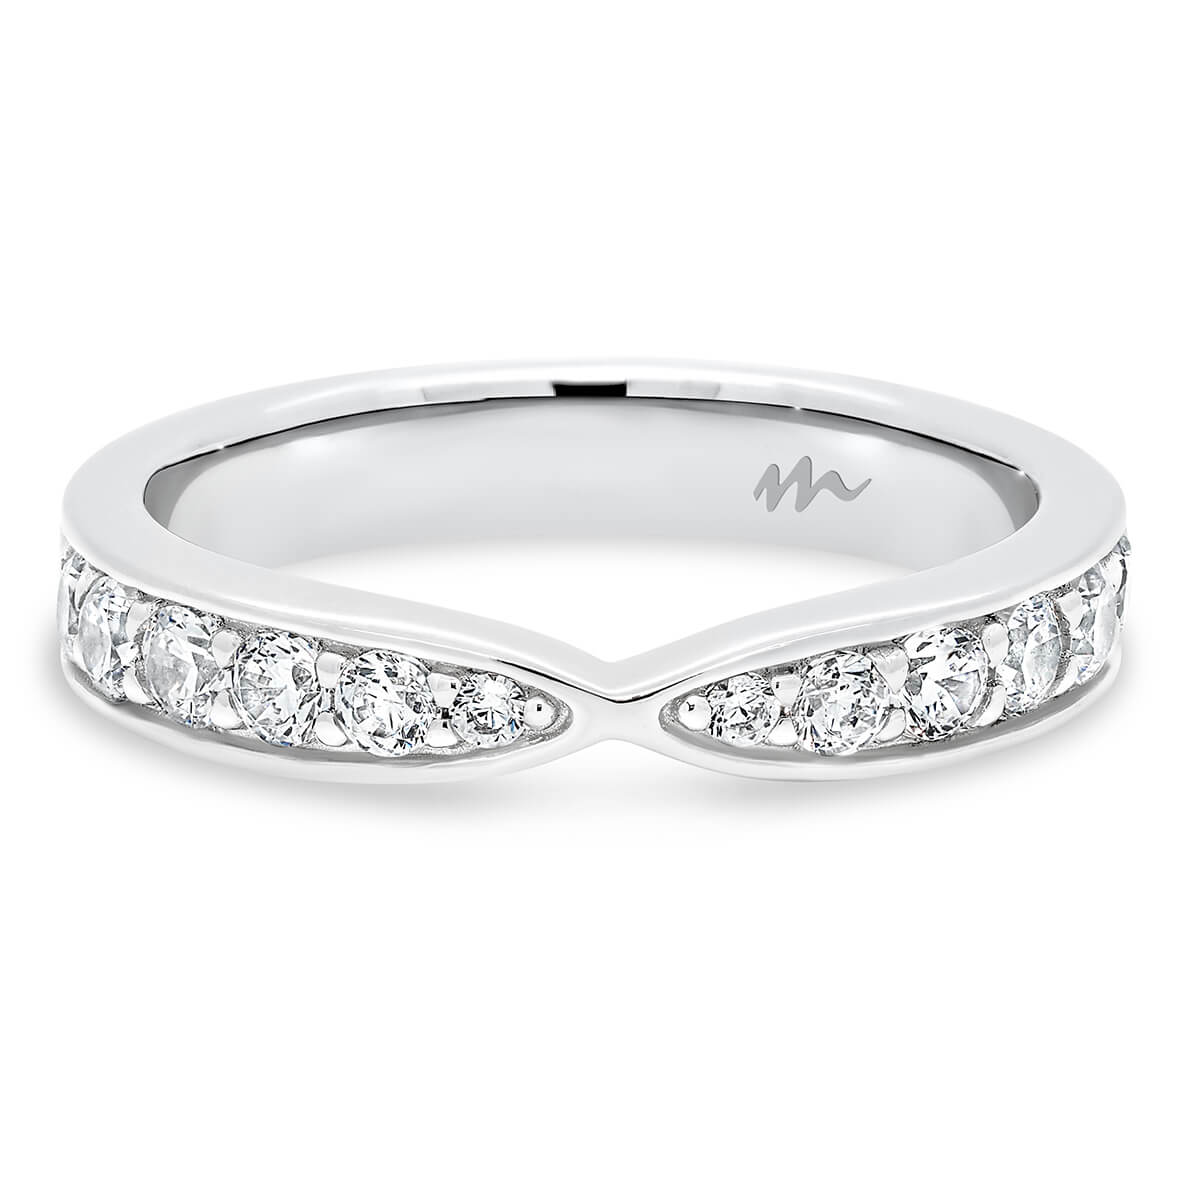 Marie 2.5 pave set tapered wedding band